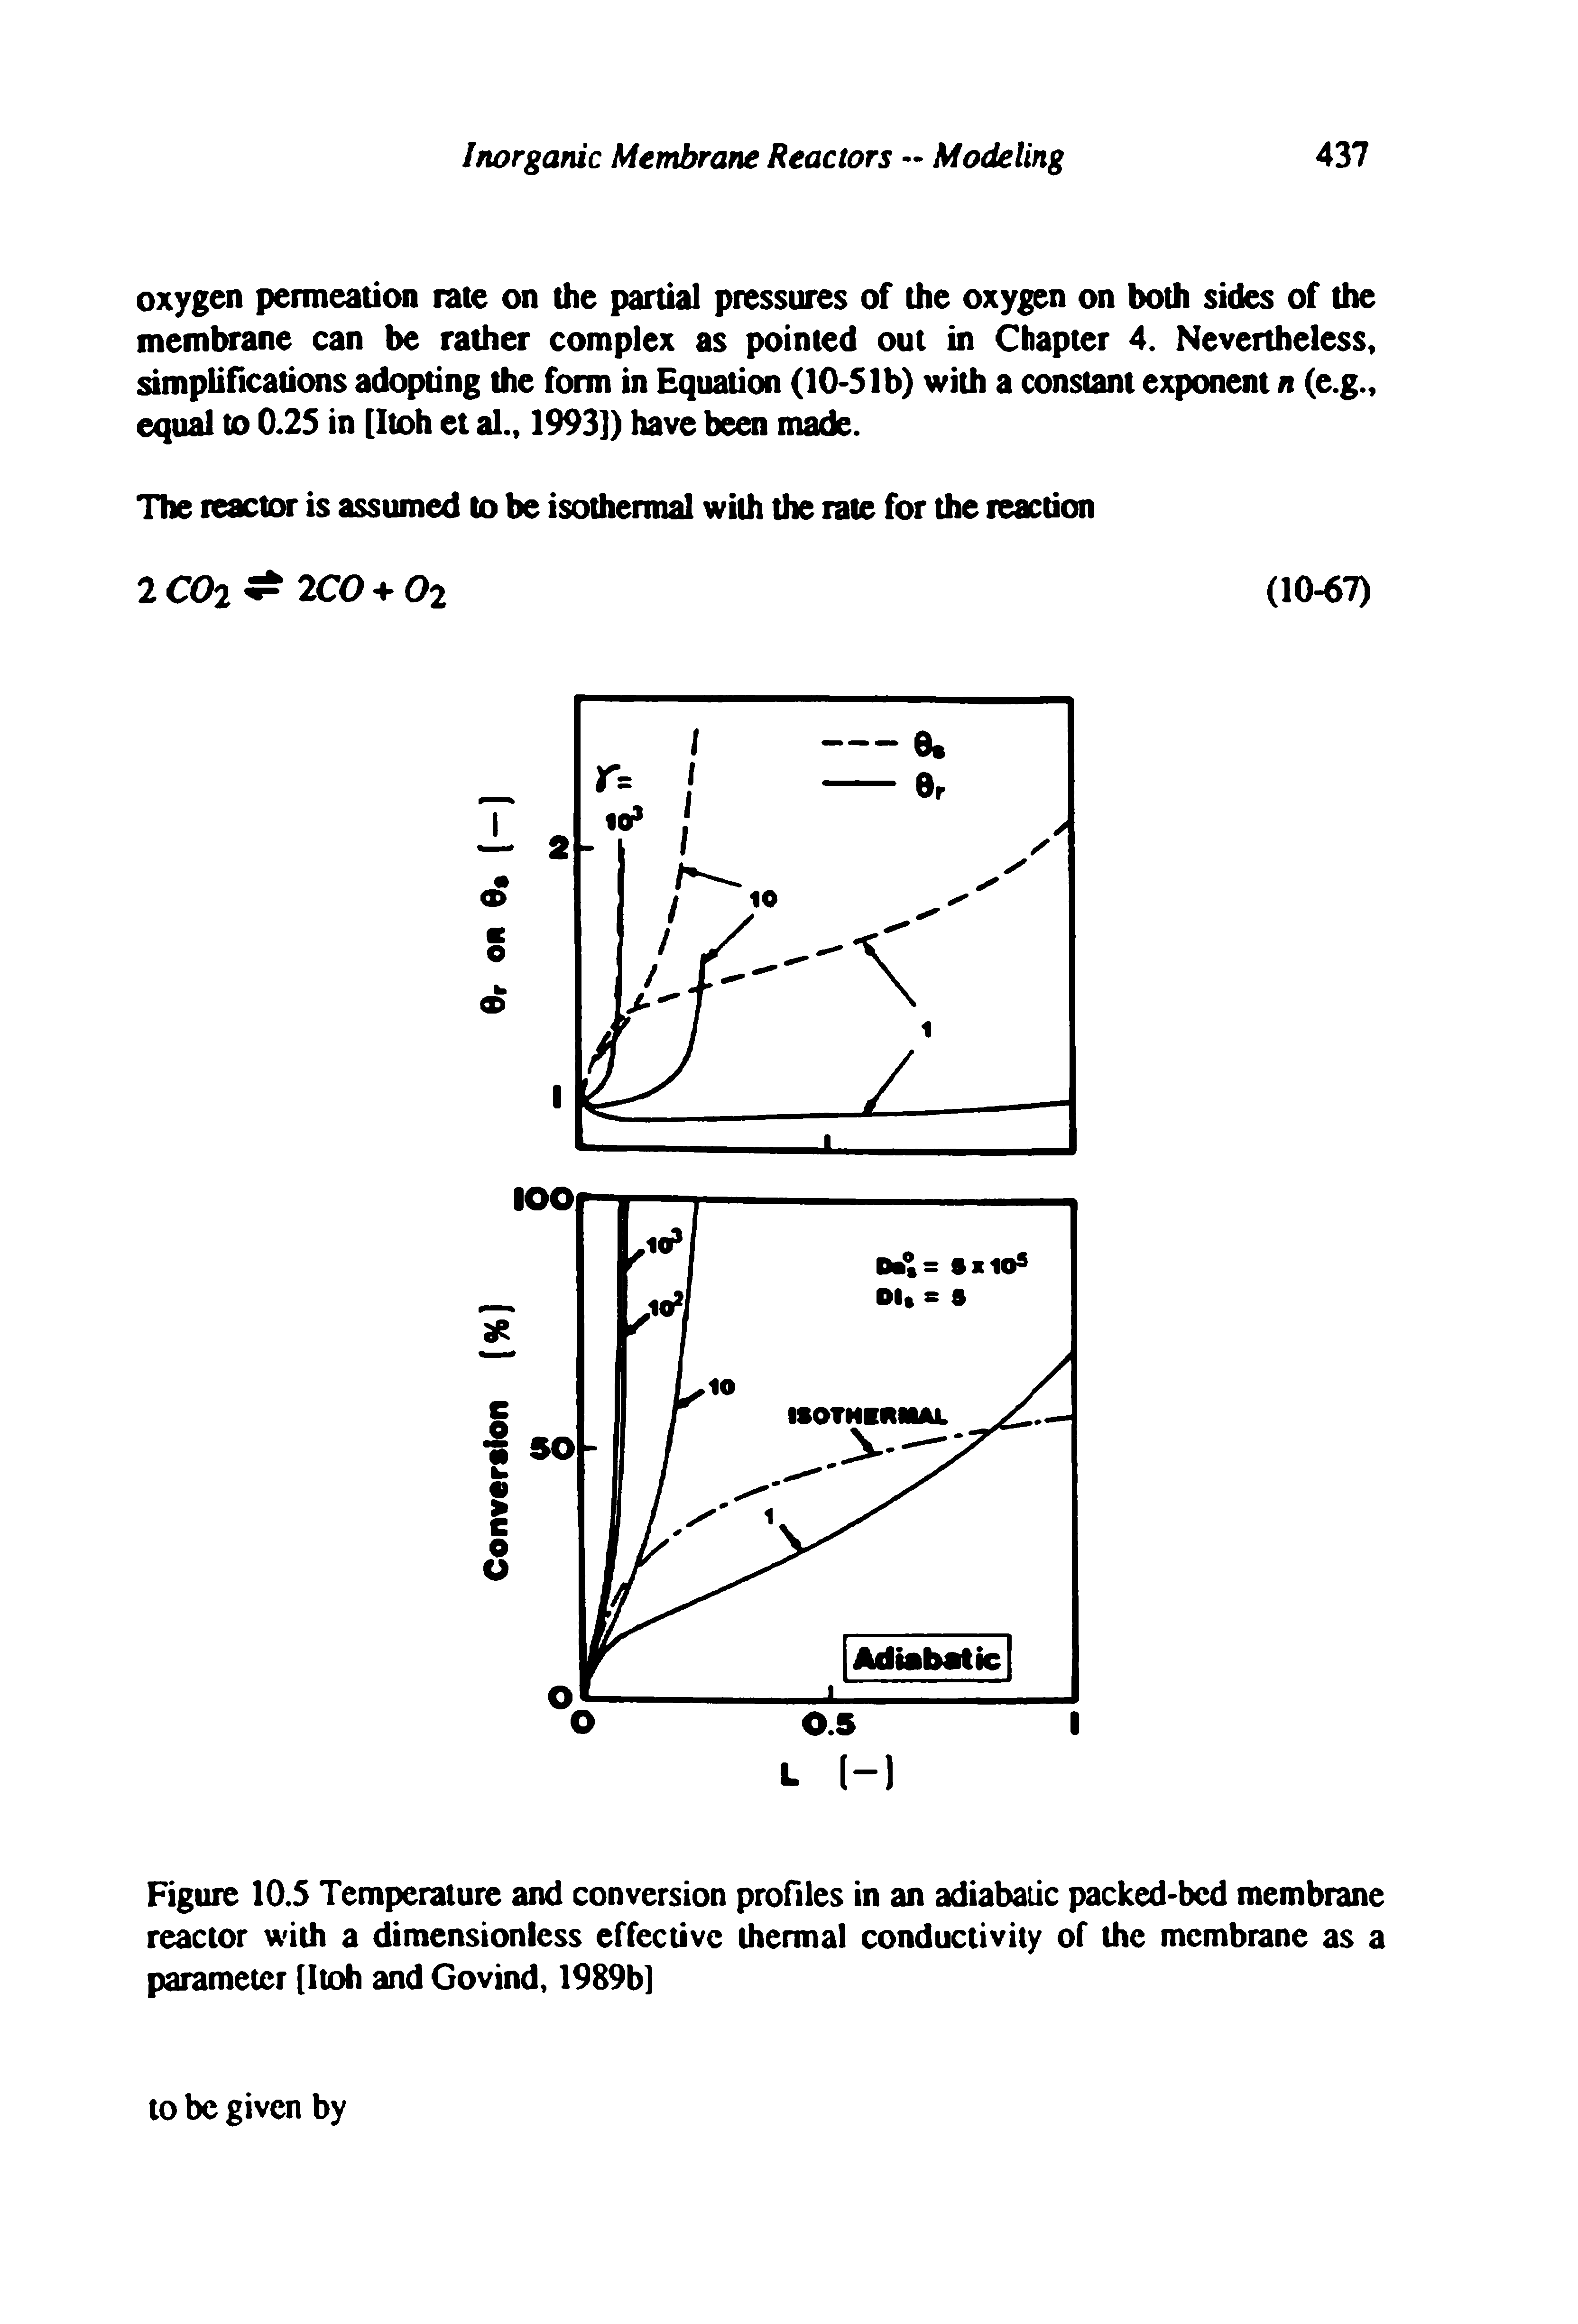 Figure 10.5 Temperature and conversion profiles in an adiabaiic packed-bed membrane reactor with a dimensionless effective thermal conductivity of the membrane as a parameter [Itoh and Govind, 1989b]...